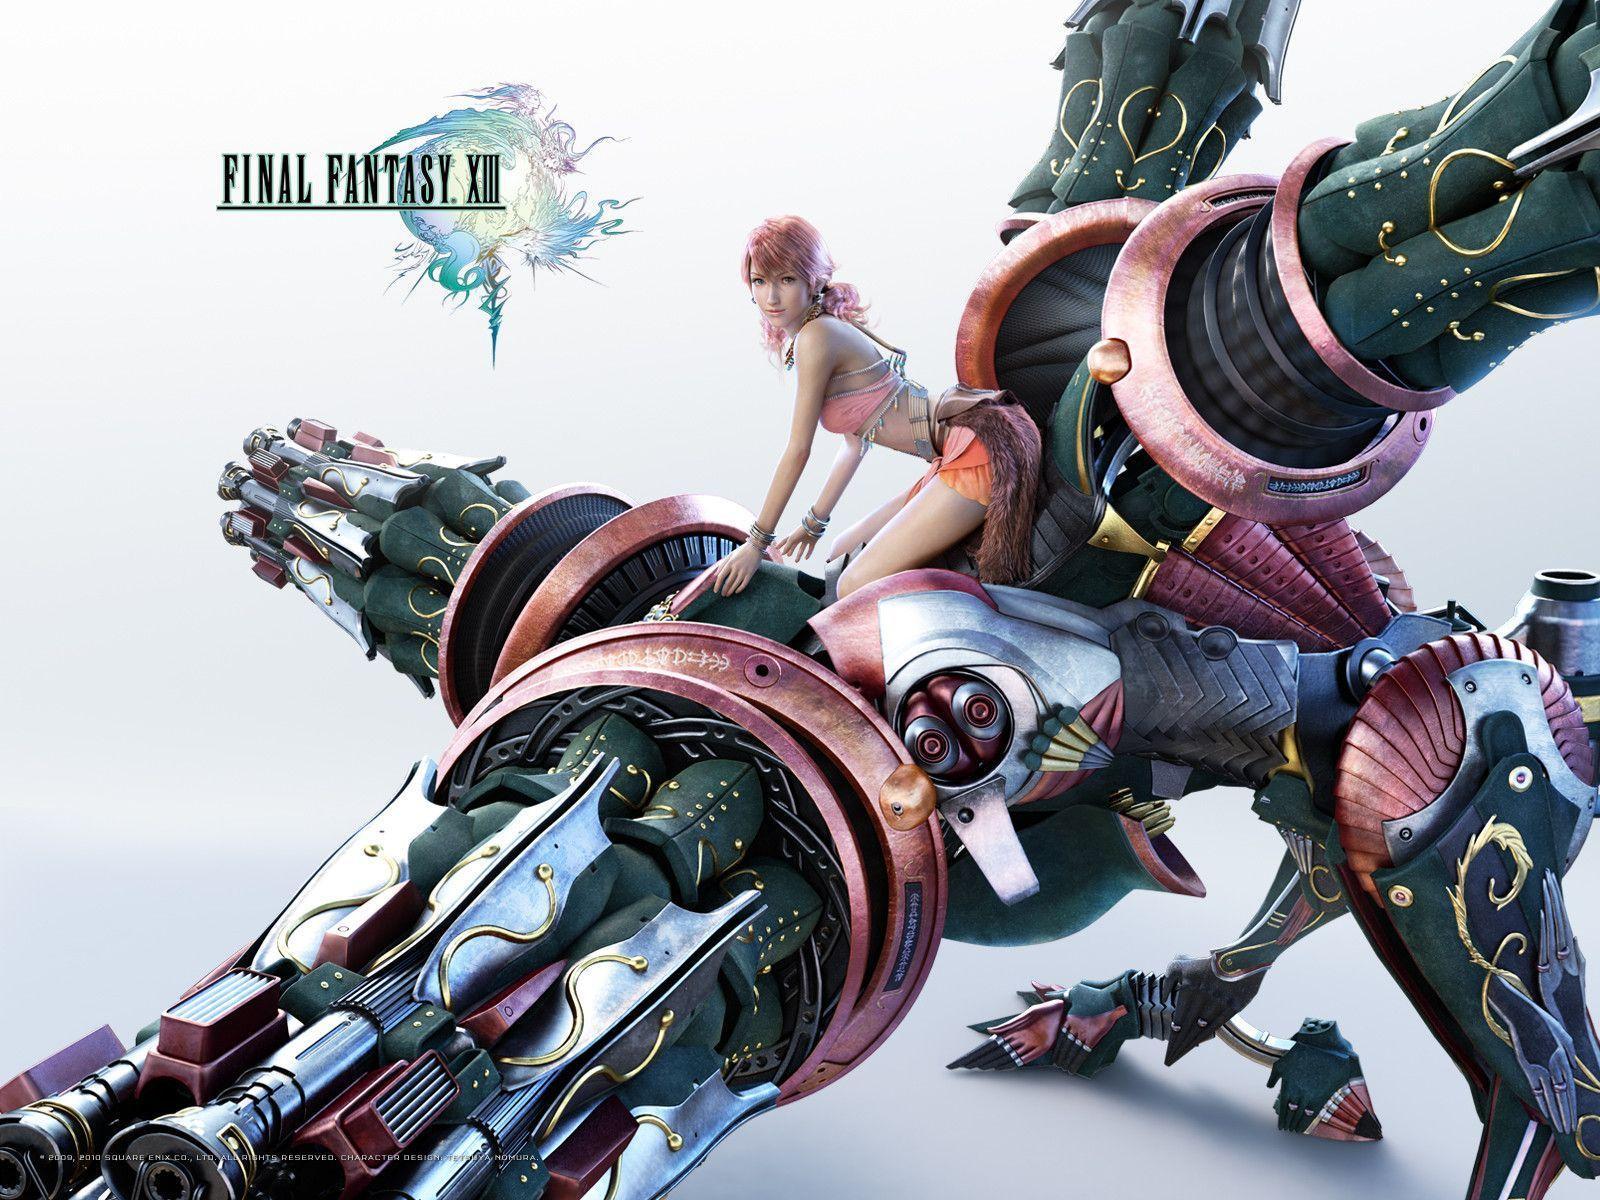 Final Fantasy Xiii Background Picture 17210 High Resolution. HD